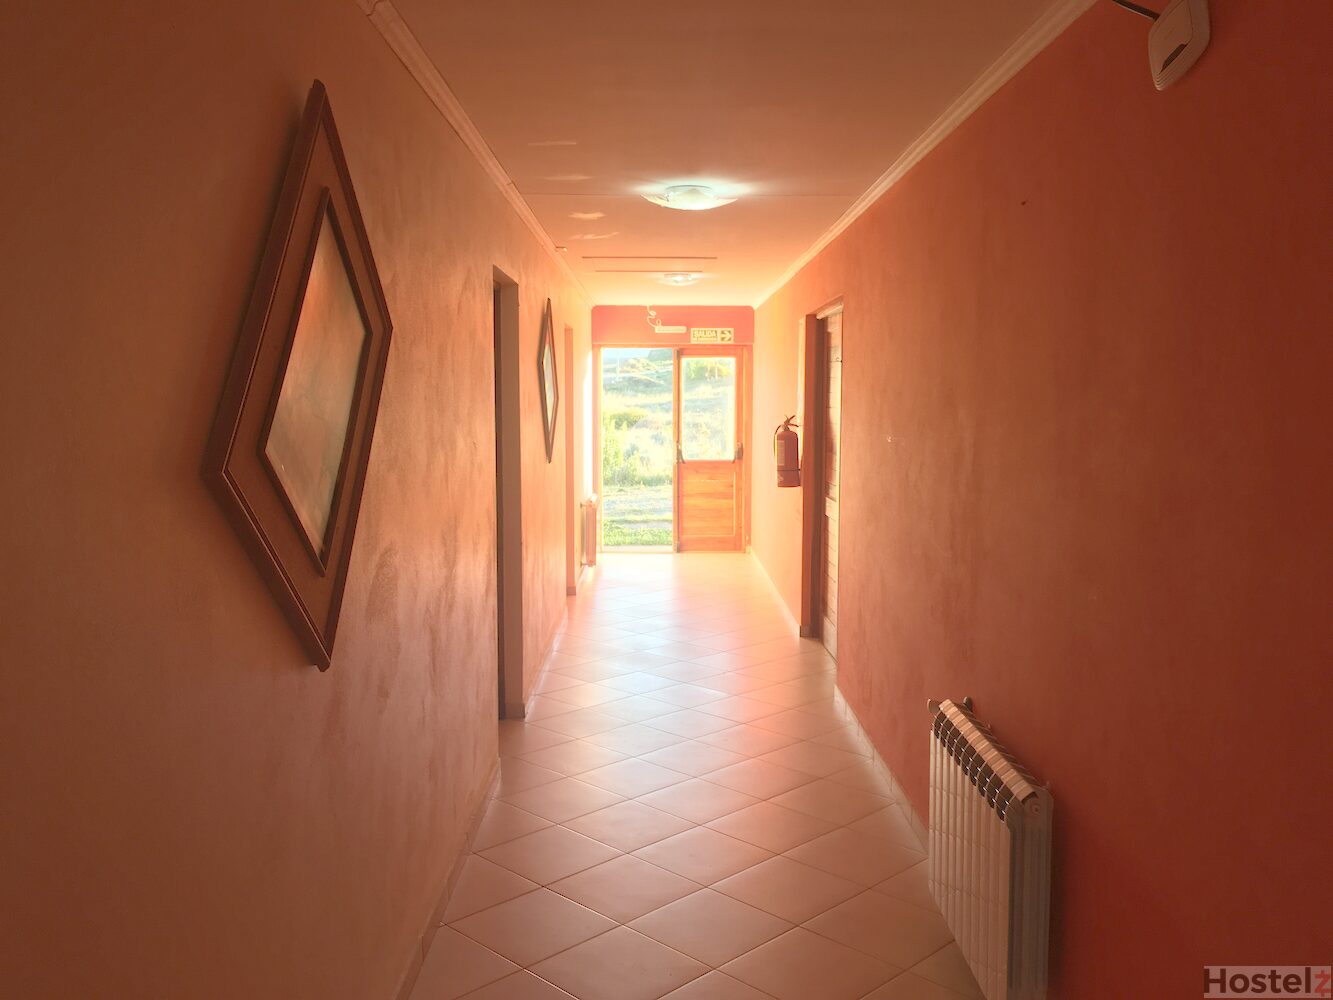 Central corridor with doors to rooms and kitchen